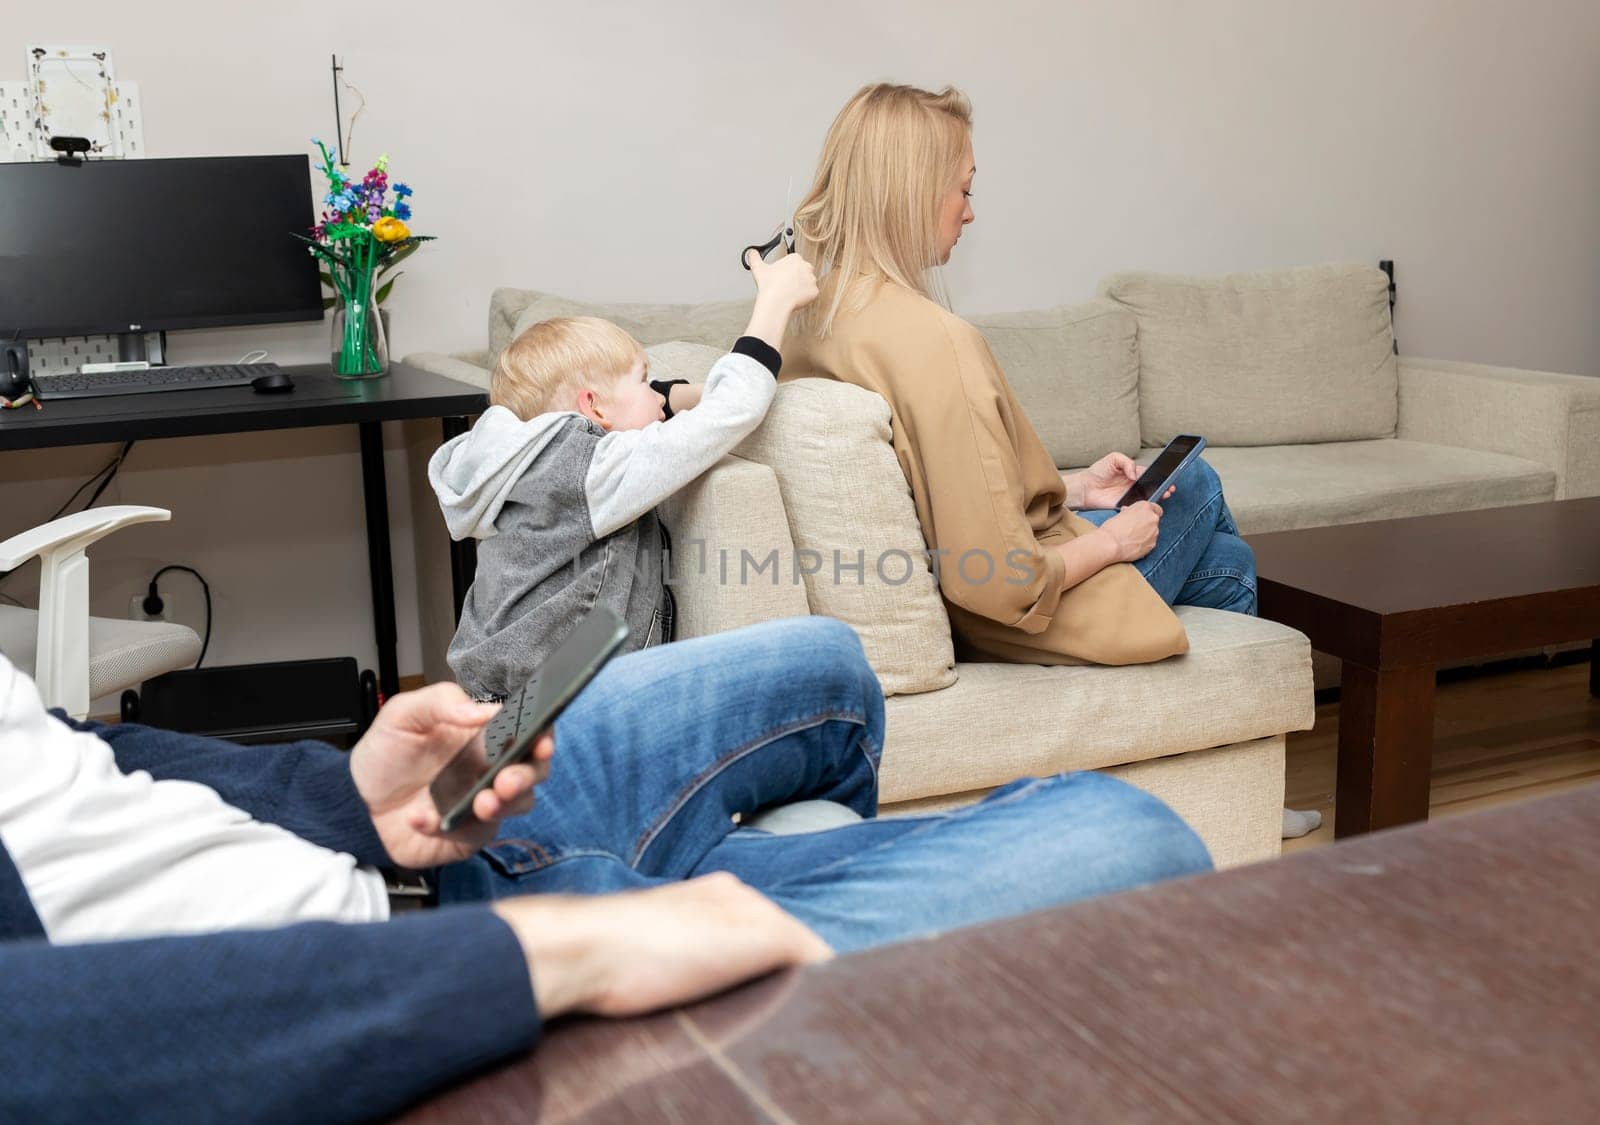 Little Boy Cuts Mother's Hair With Scissors While Parents Look, Sit At Smartphone. Deprivation, Disconnected Family, Emotionally Cold Parents, Social Issue. Horizontal Plane by netatsi